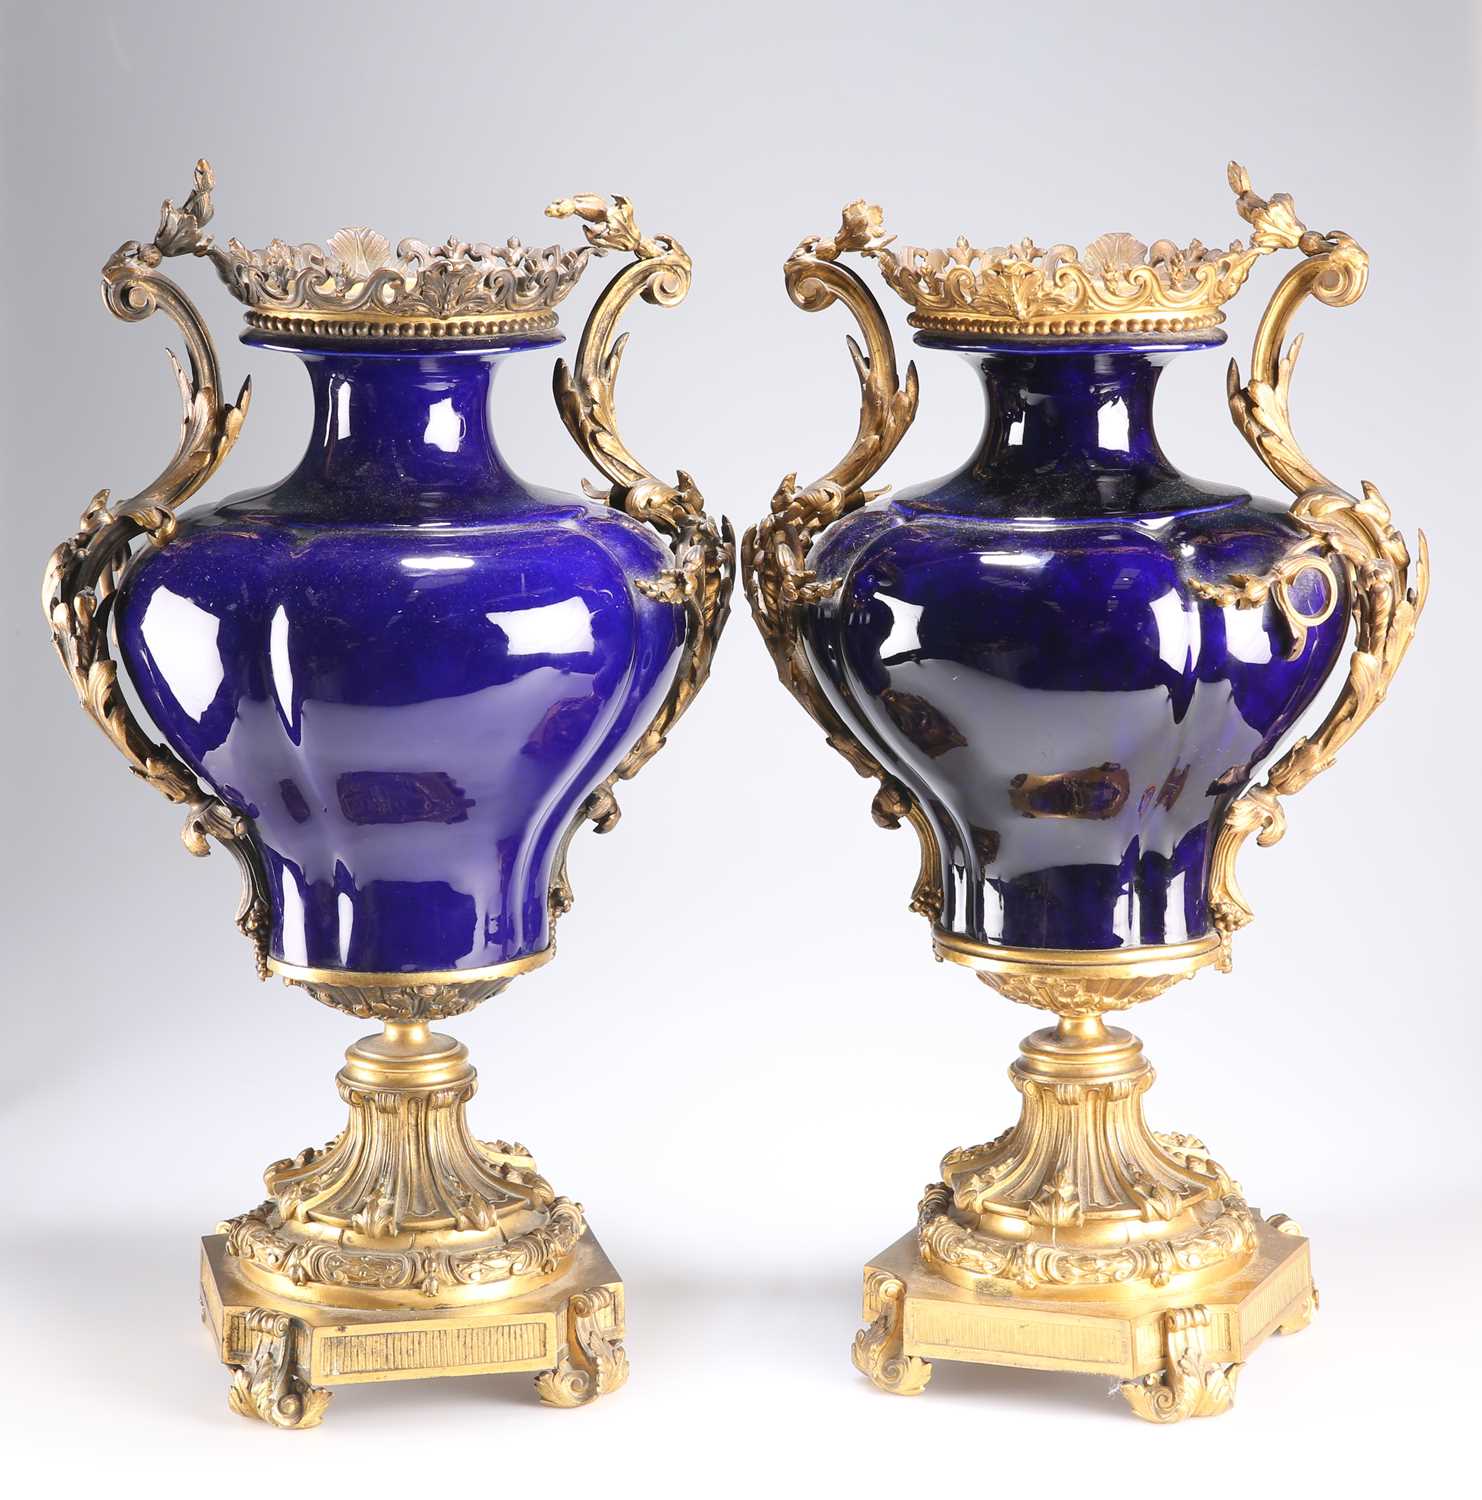 A PAIR OF LOUIS XV STYLE GILT-BRONZE MOUNTED PORCELAIN VASES, 19TH CENTURY